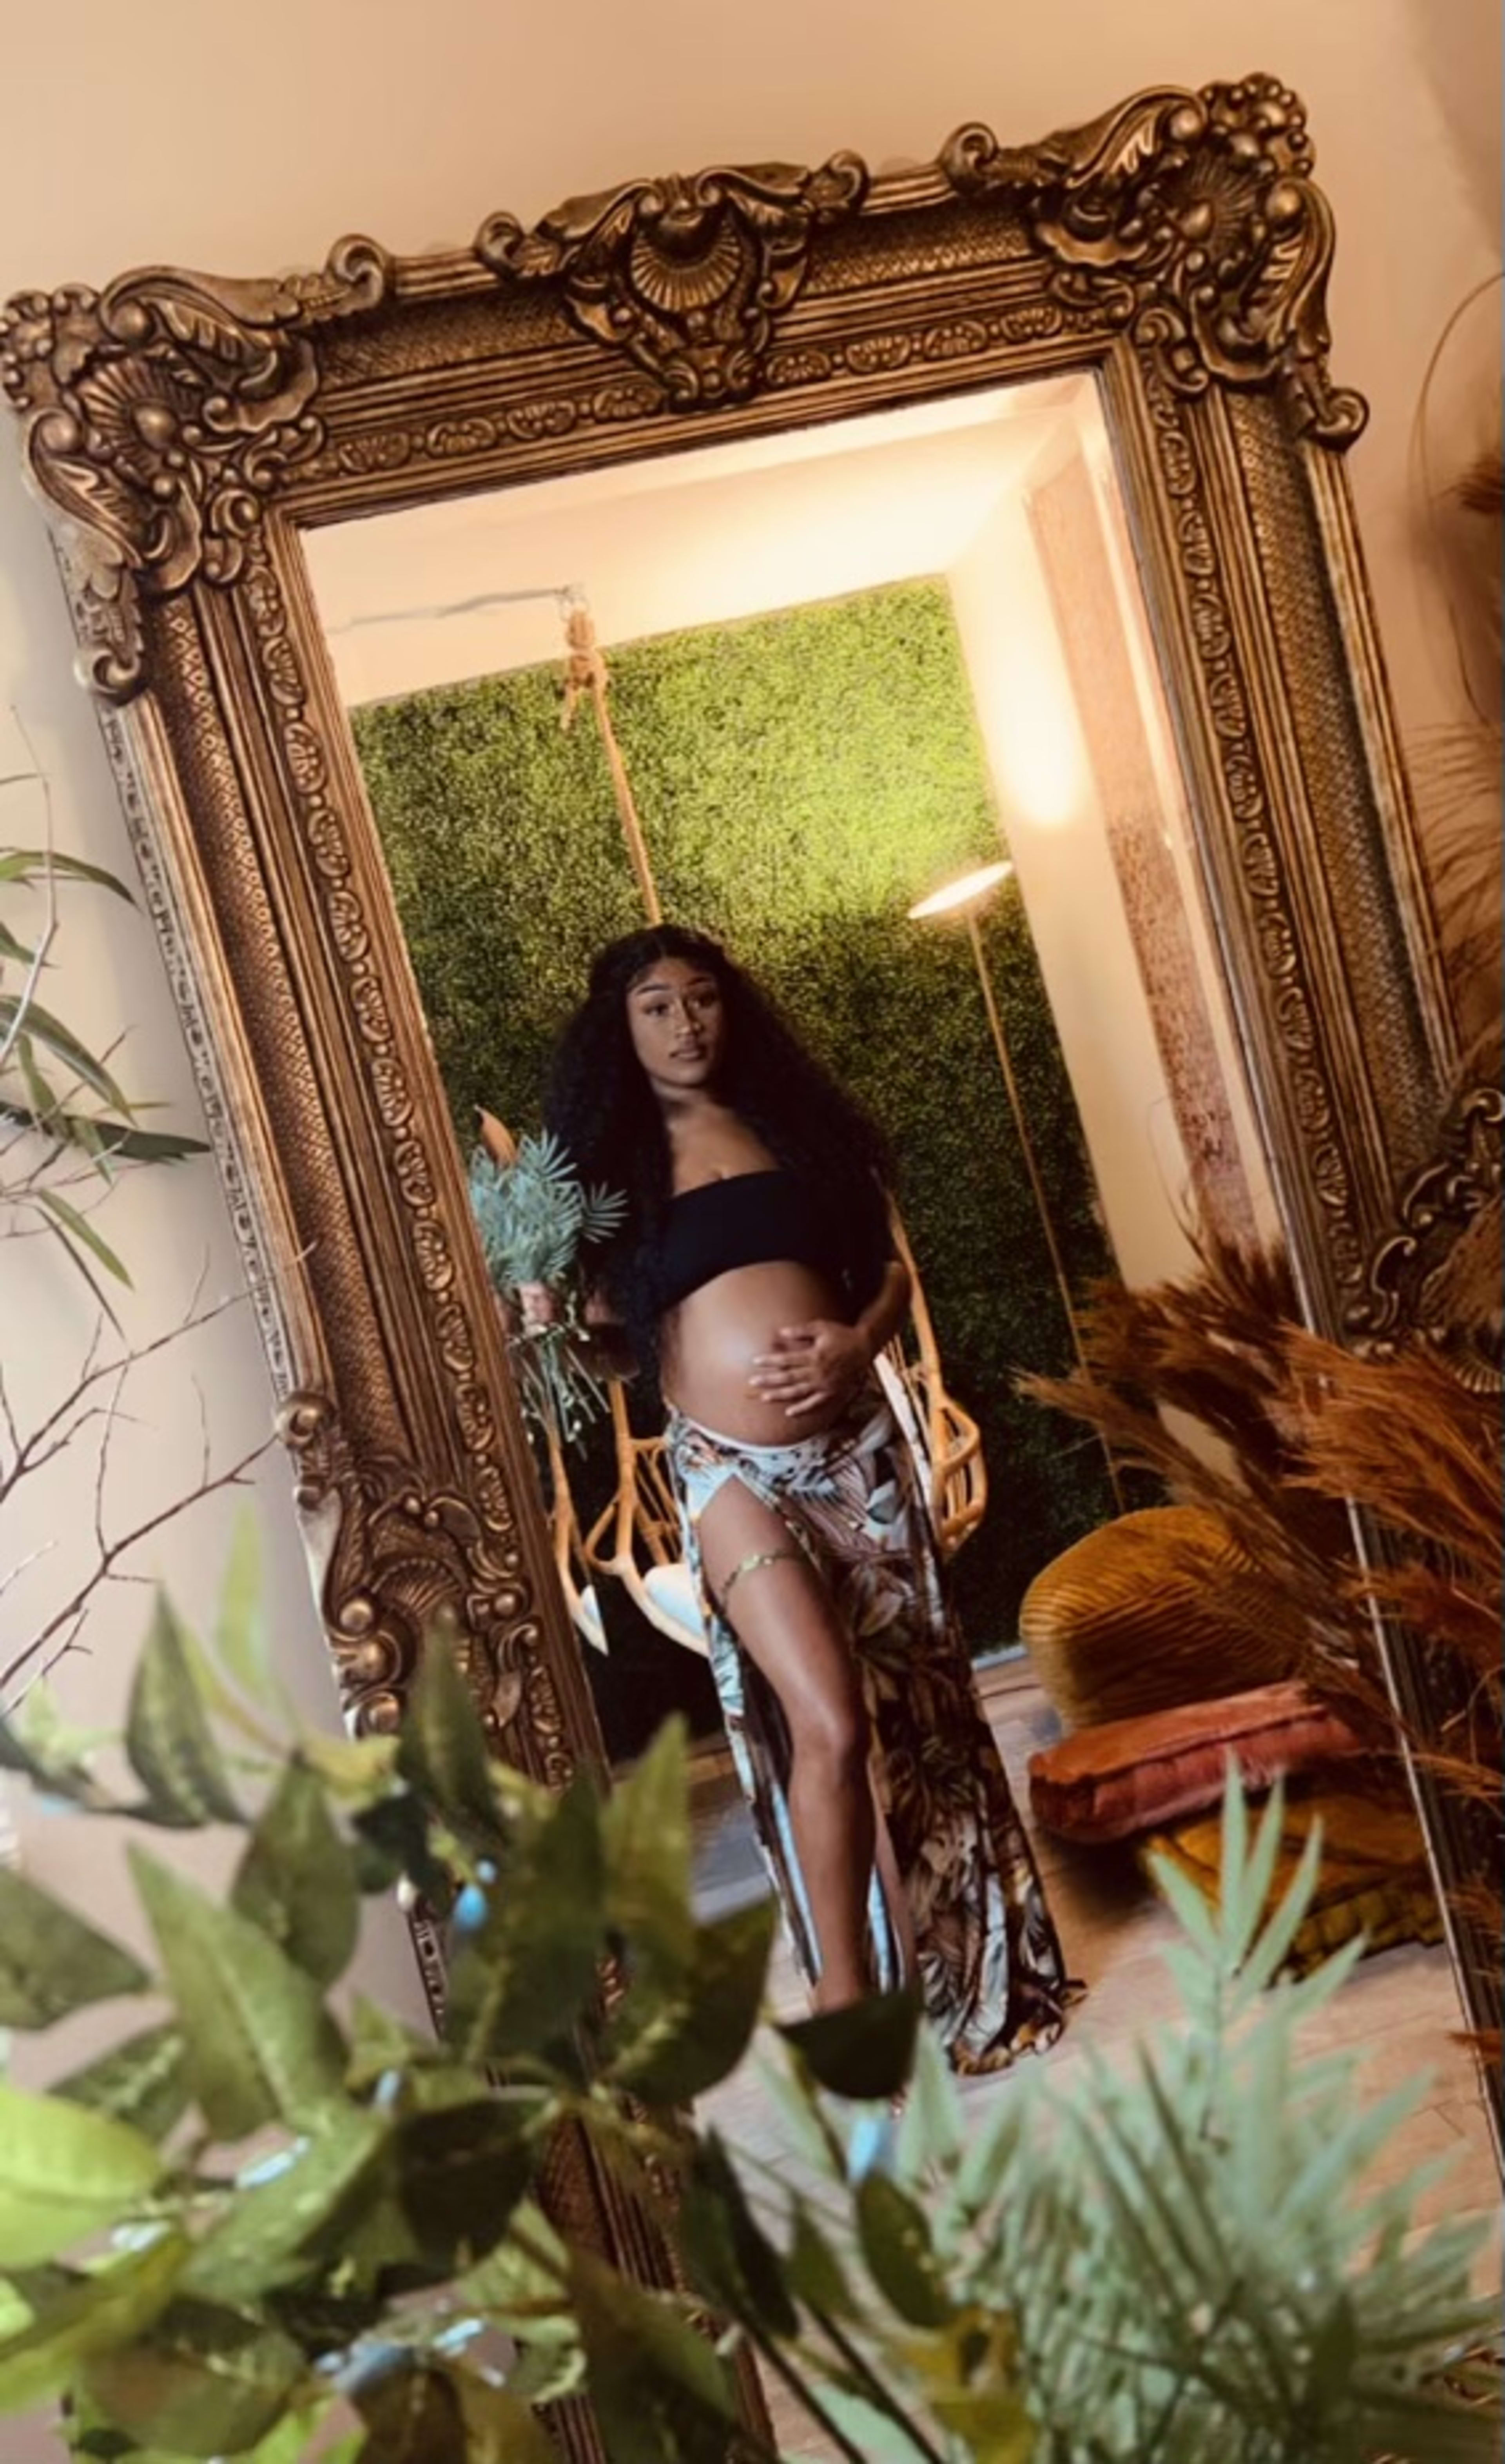 A pregnant woman standing in front of a mirror in a boho setting